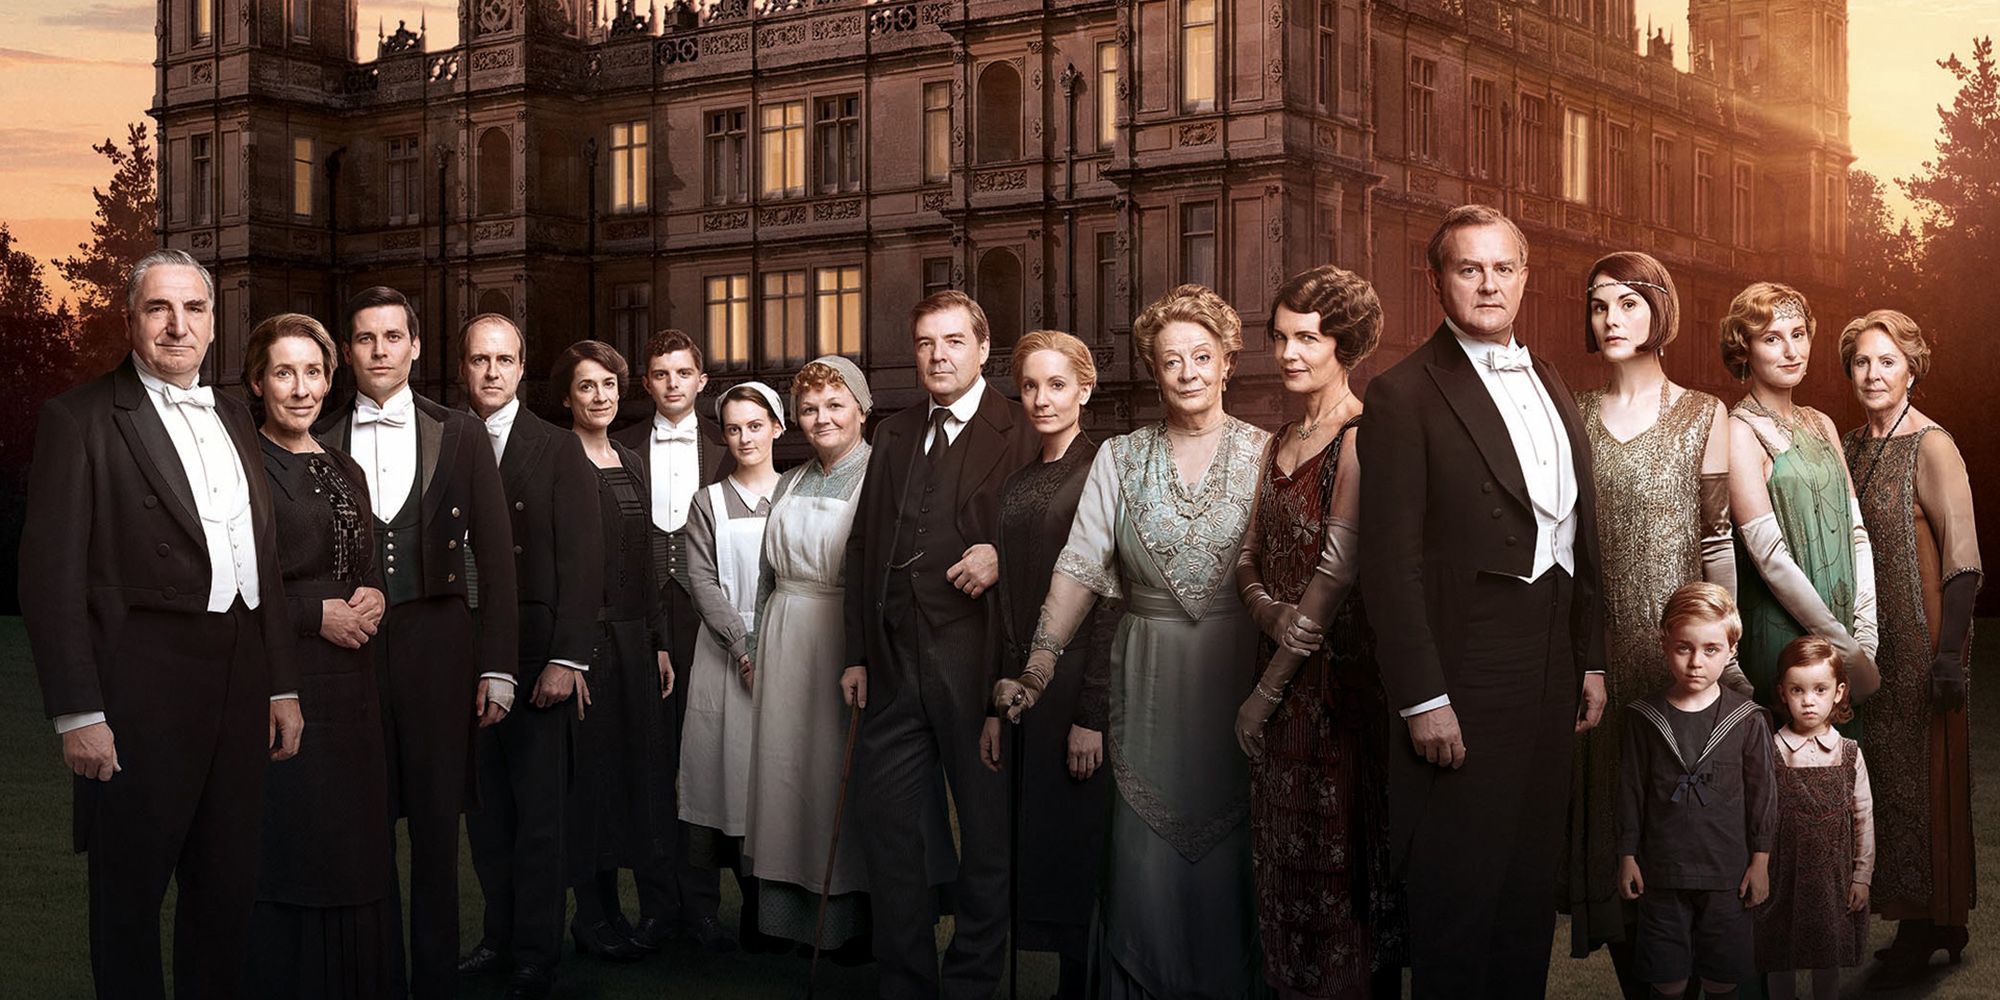 11 Shows Like Downton Abbey